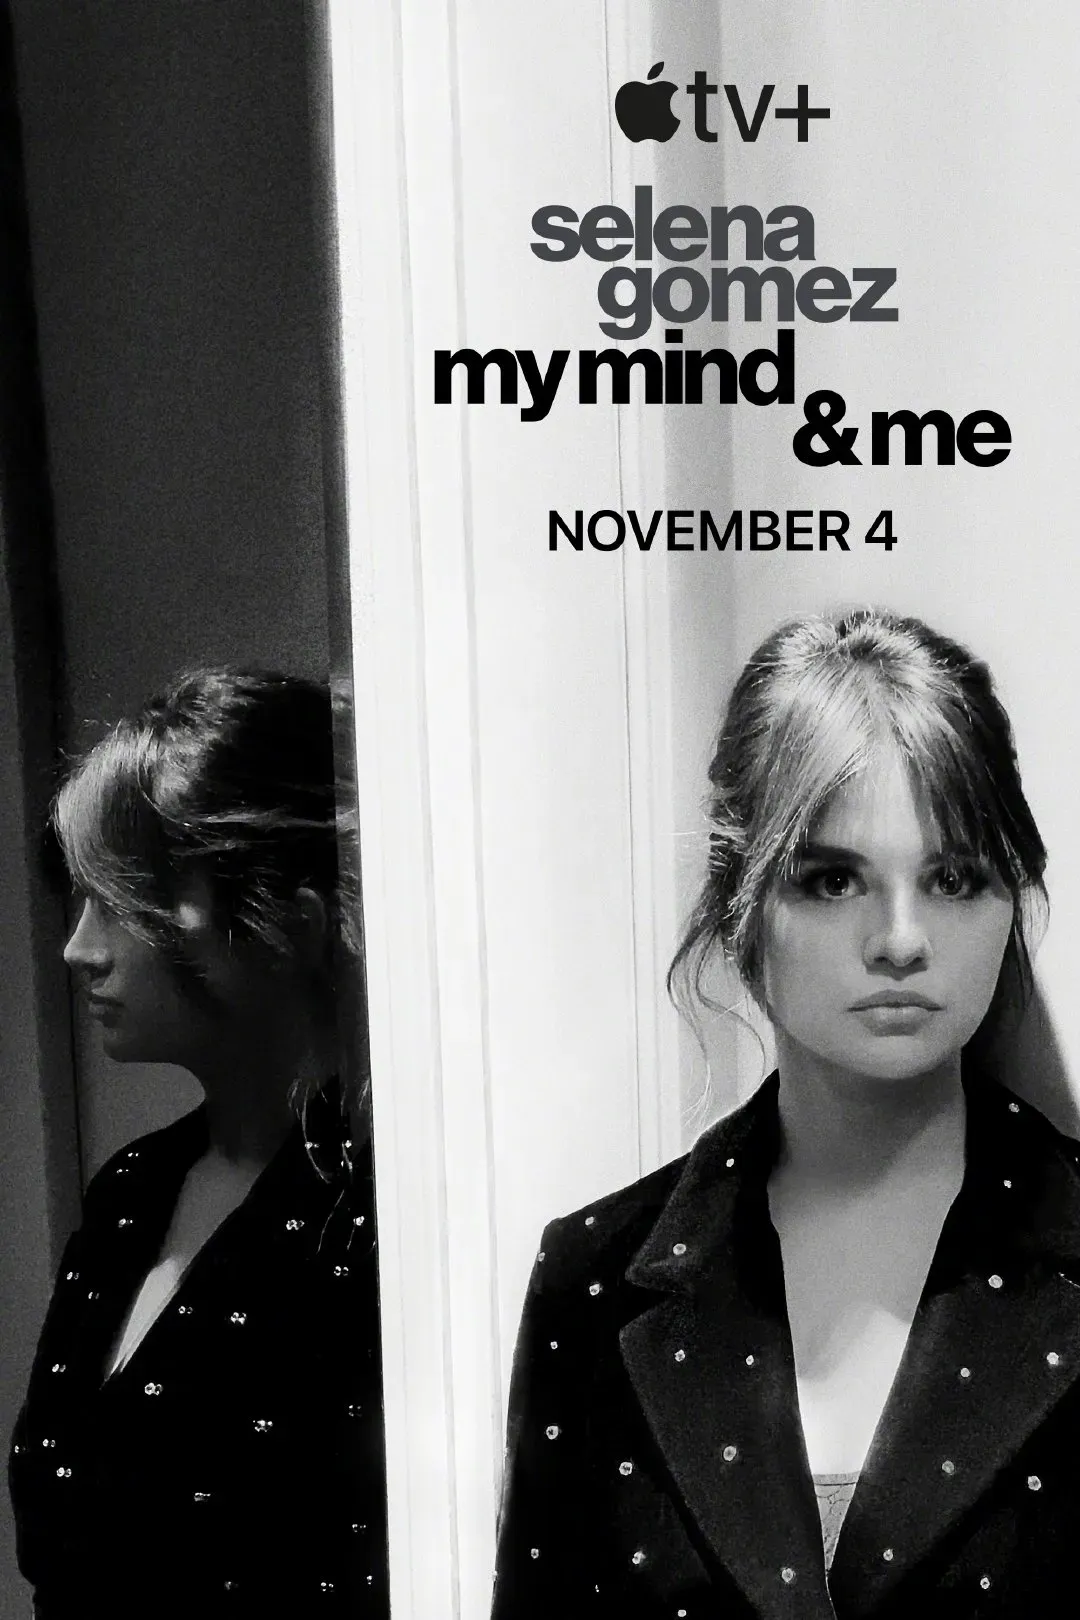 Selena Gomez's Documentary 'Selena Gomez: My Mind & Me' Releases Official Trailer and Poster | FMV6